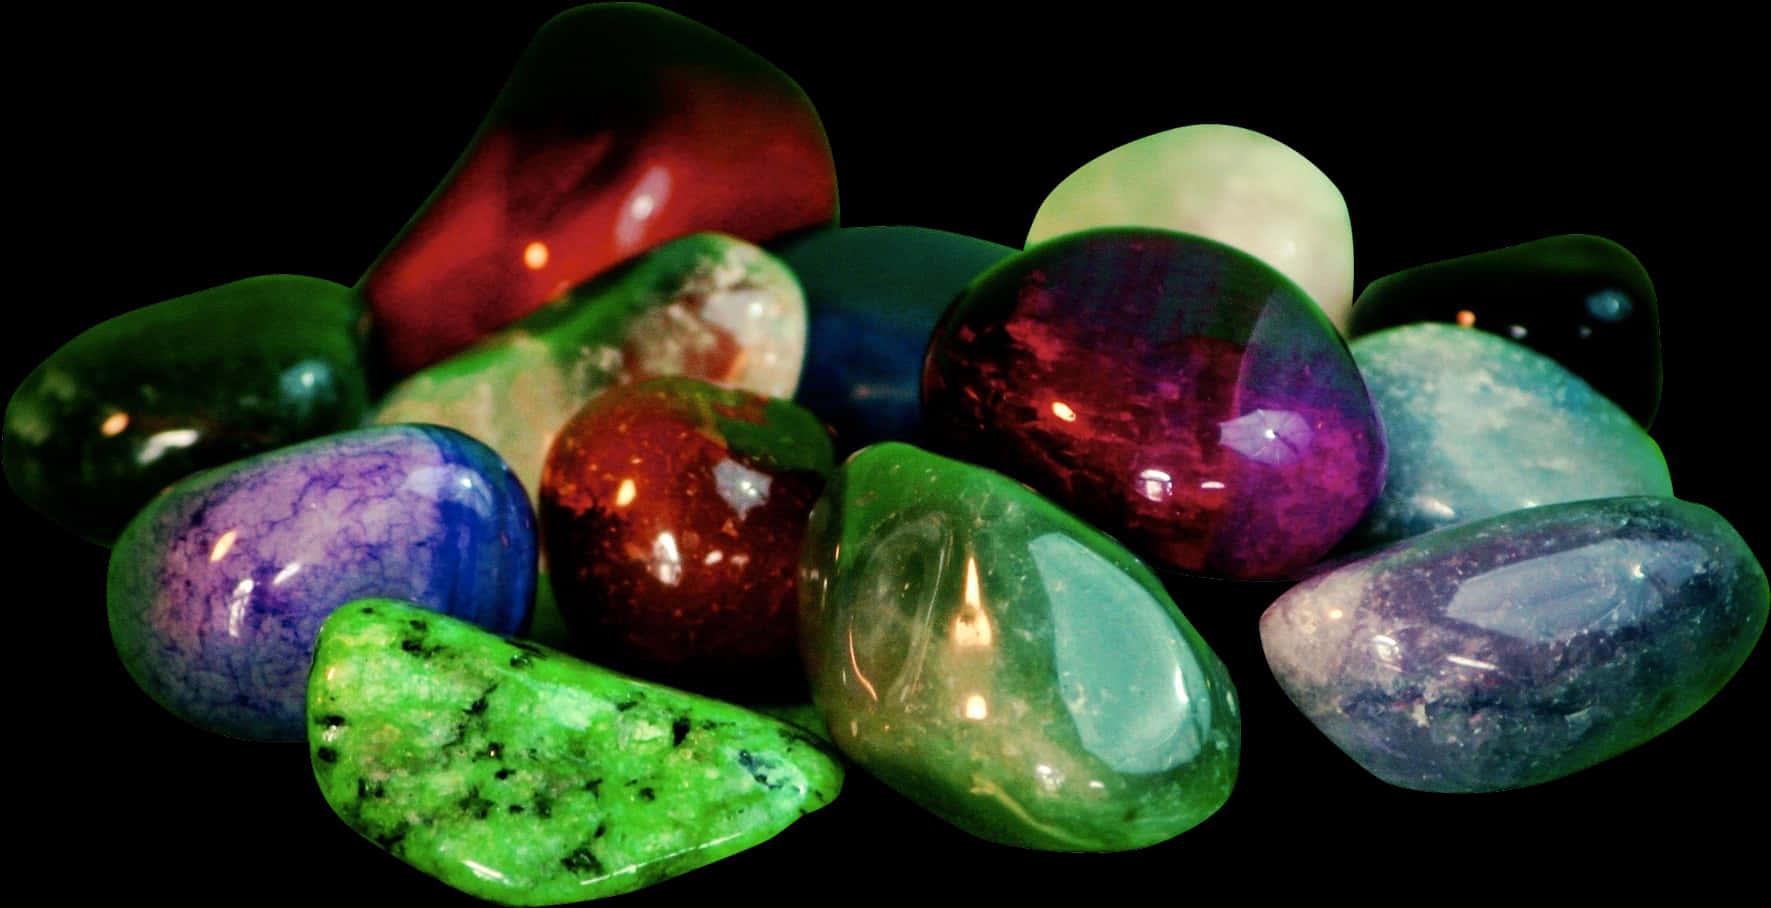 Colorful Gemstones Collection.jpg